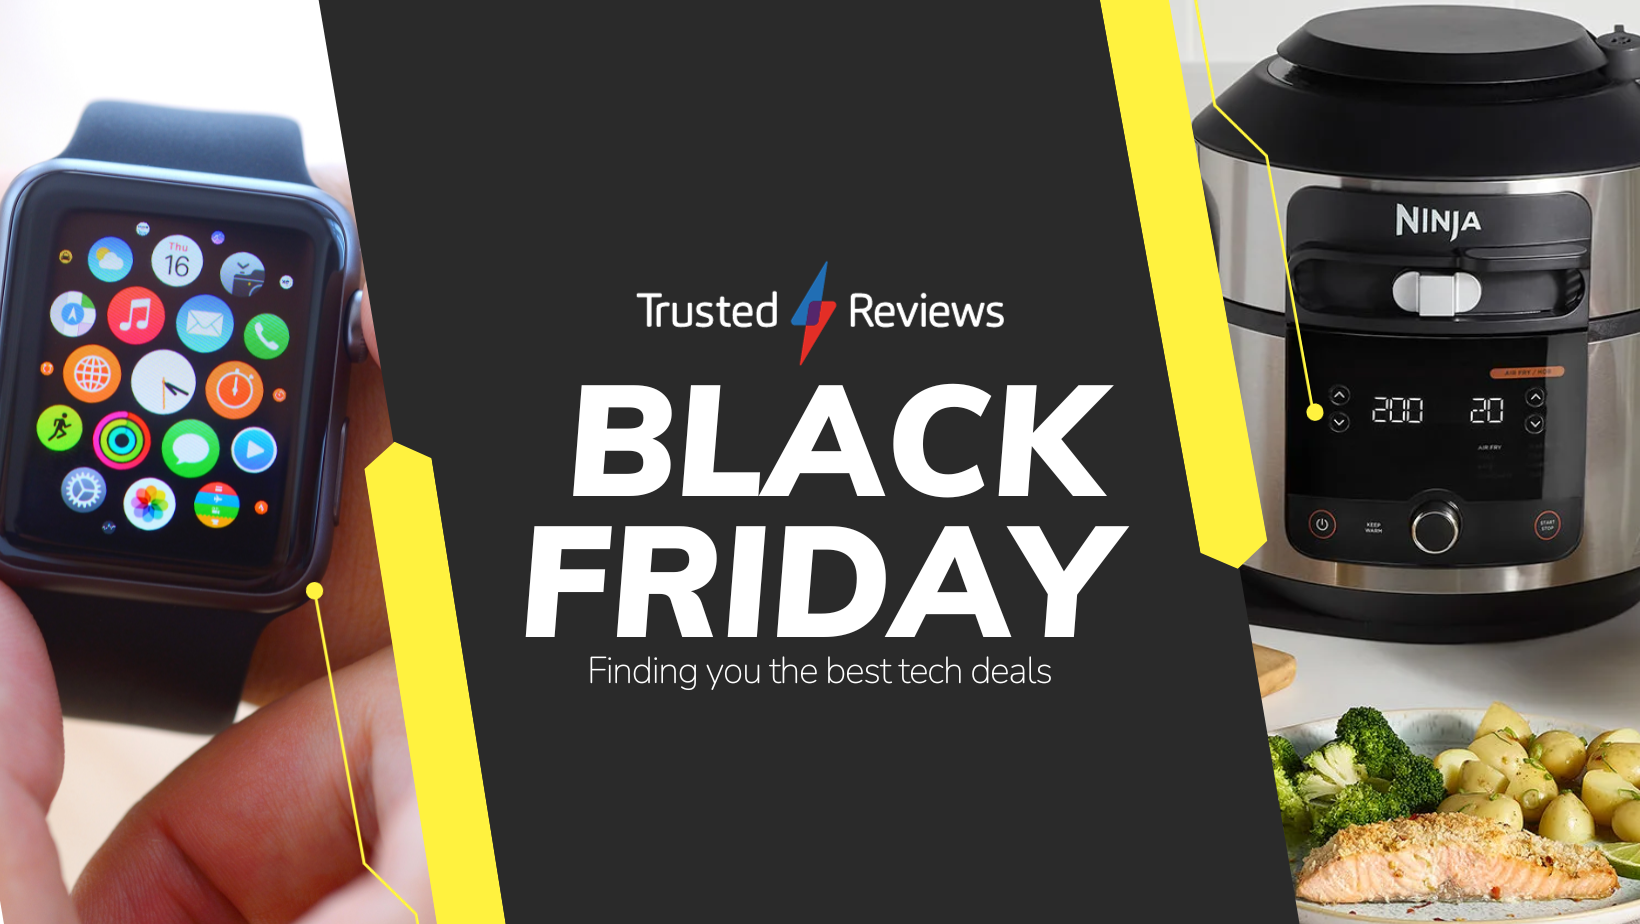 Black Friday Deals Live: Last chance bargains this Sunday